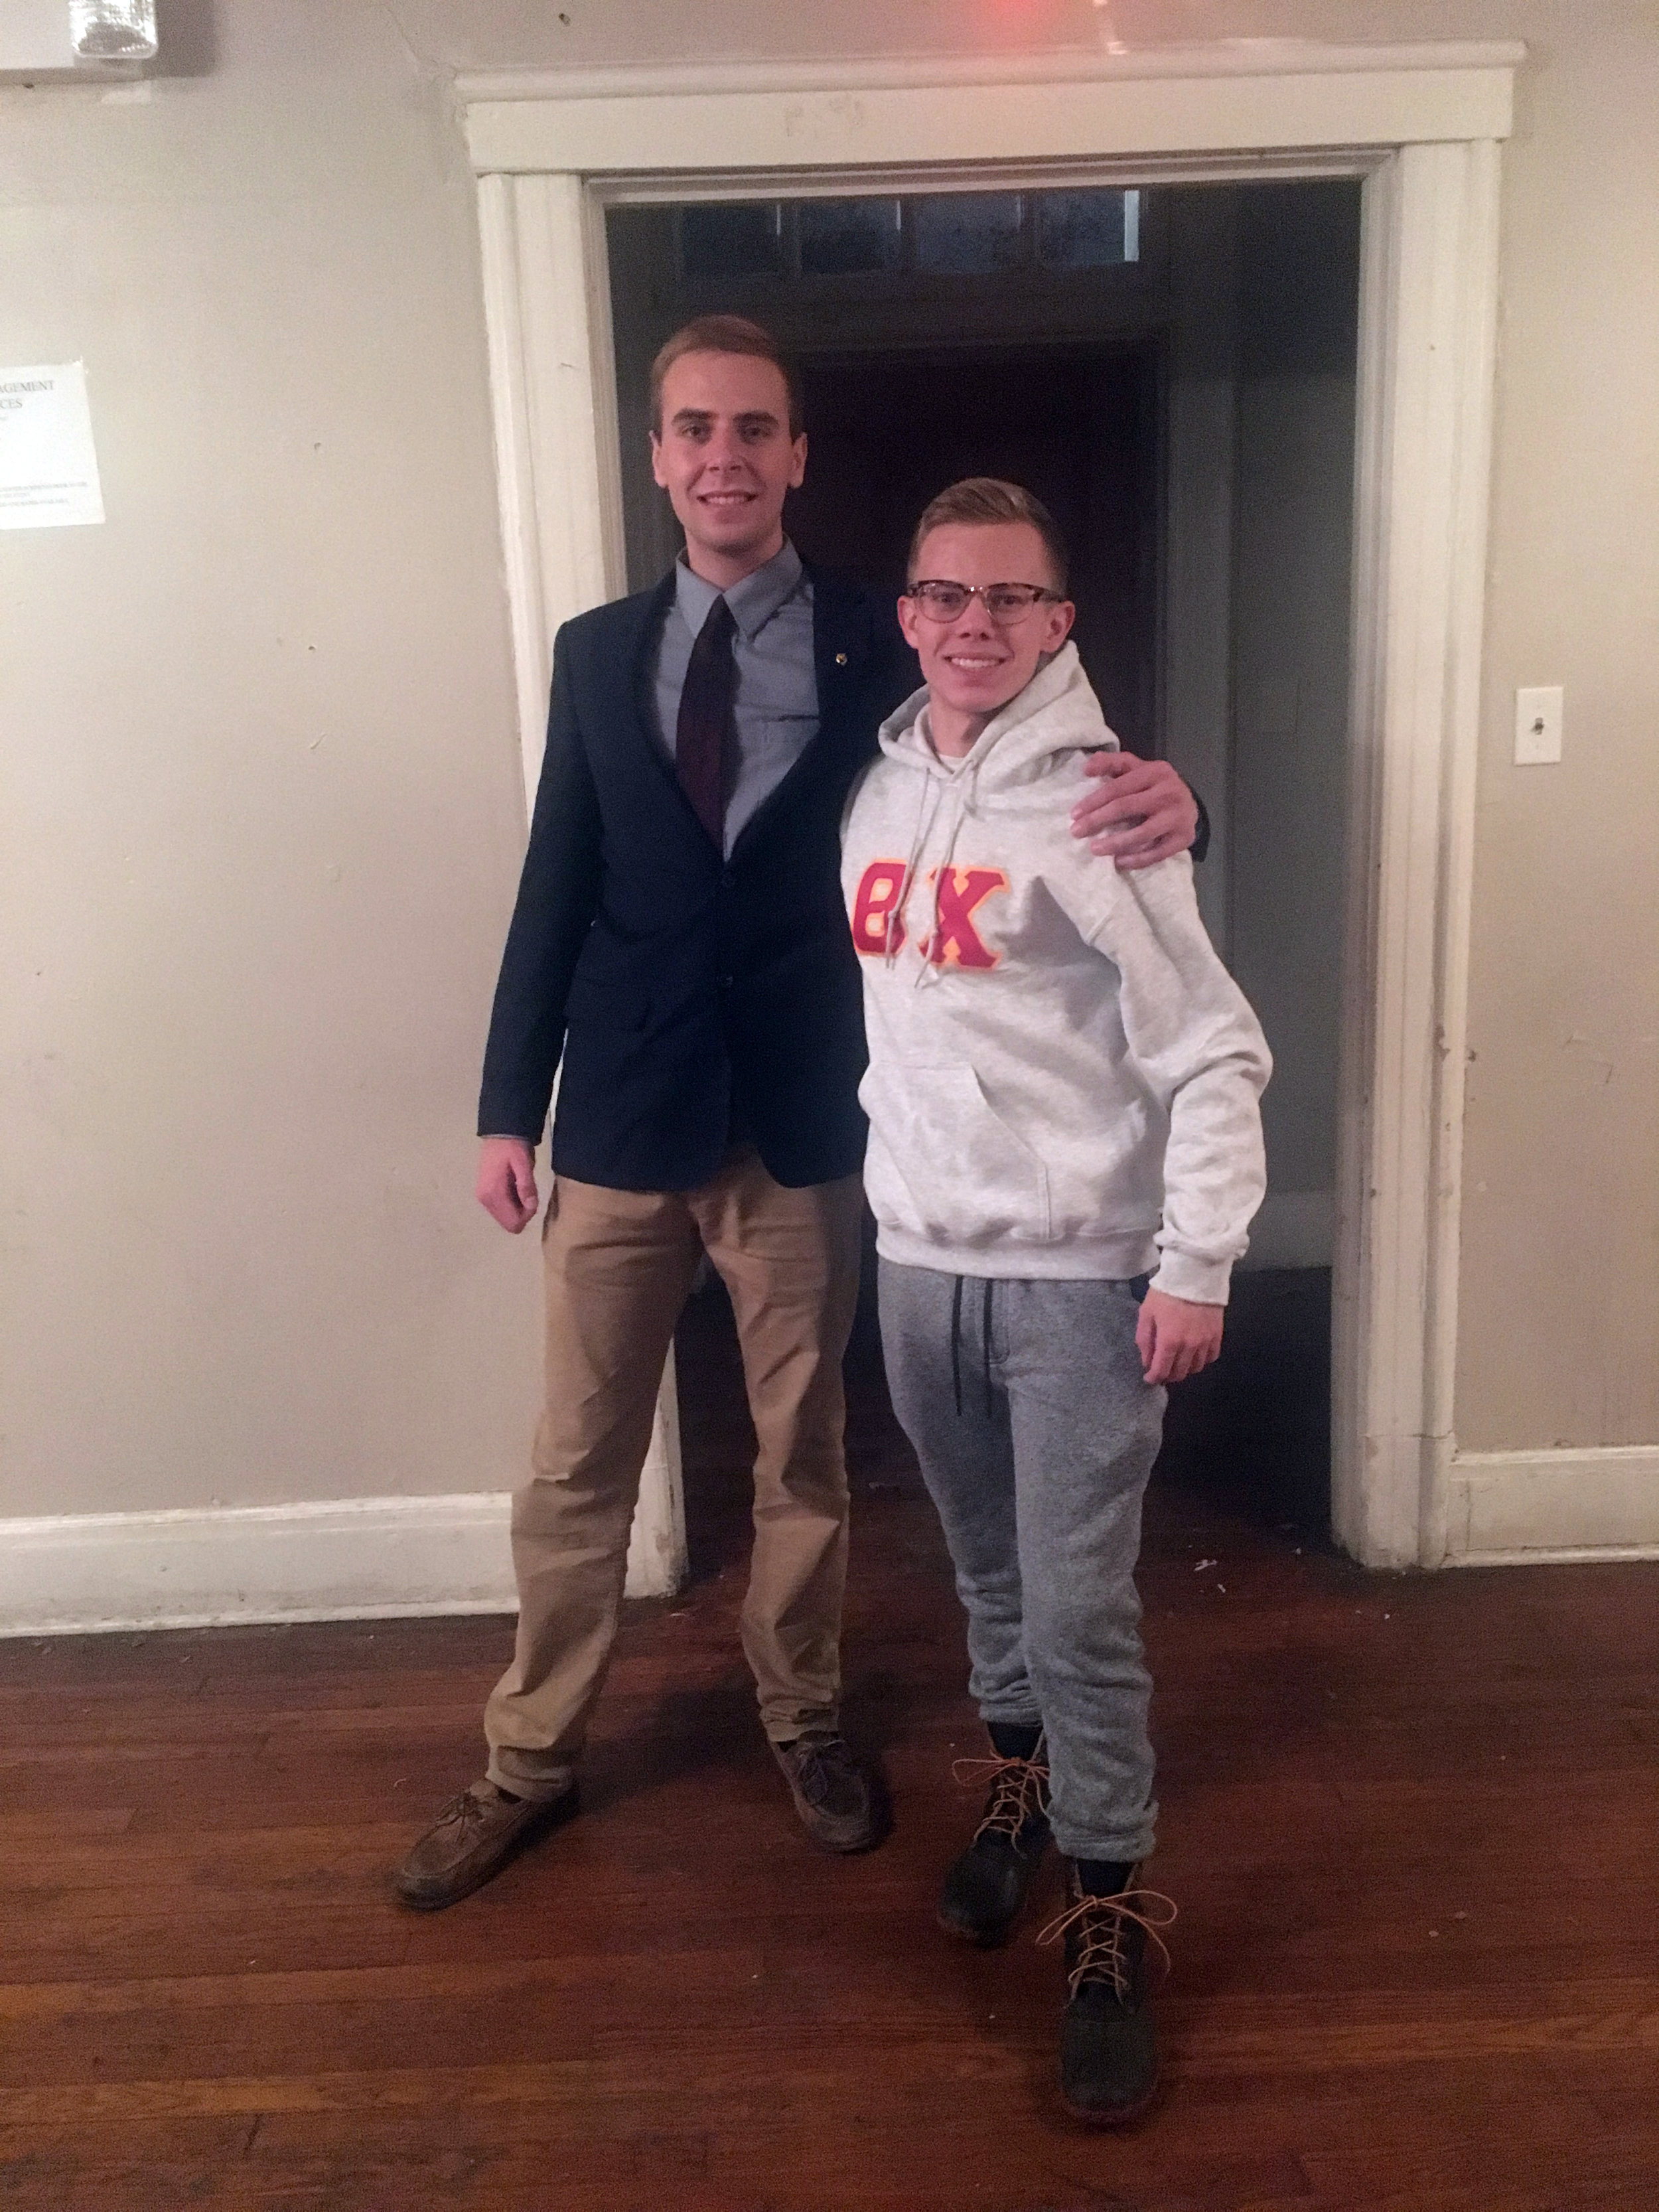  Newly Initiated brother with with big brother -  Carson and Jake - Nov. 2018 